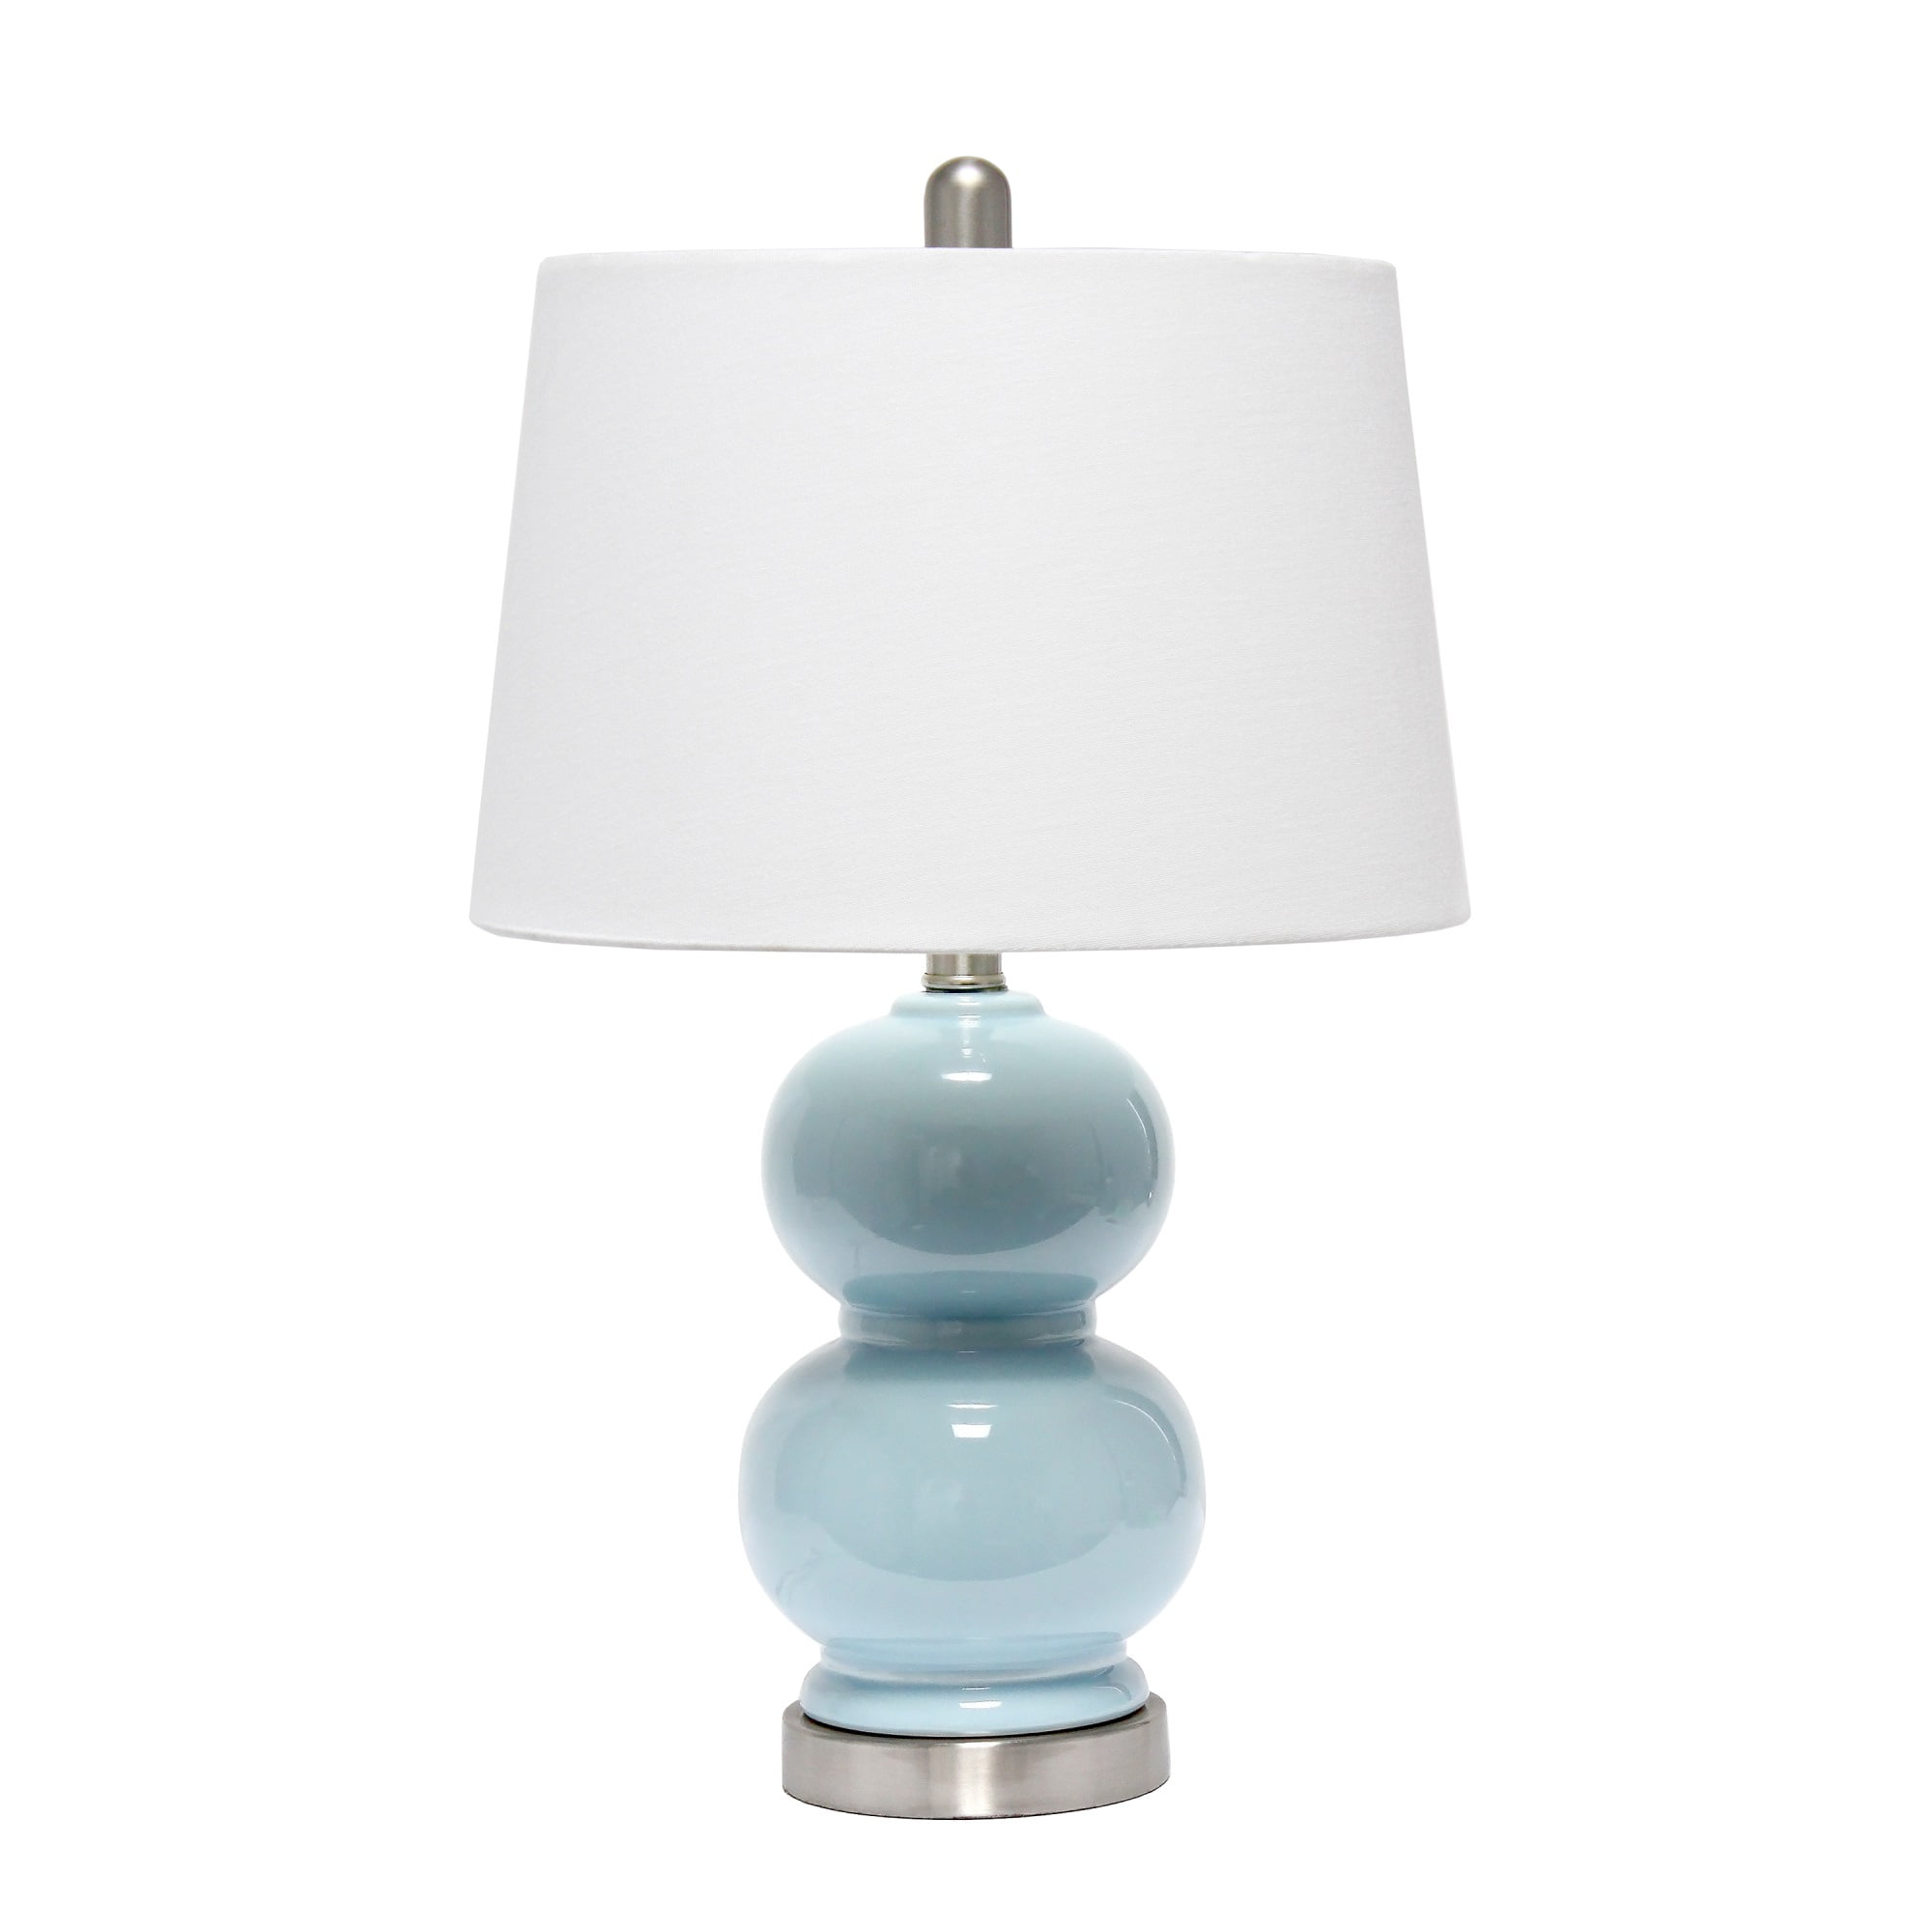 Lalia Home Dual Orb Table Lamp with Fabric Shade, Light Blue